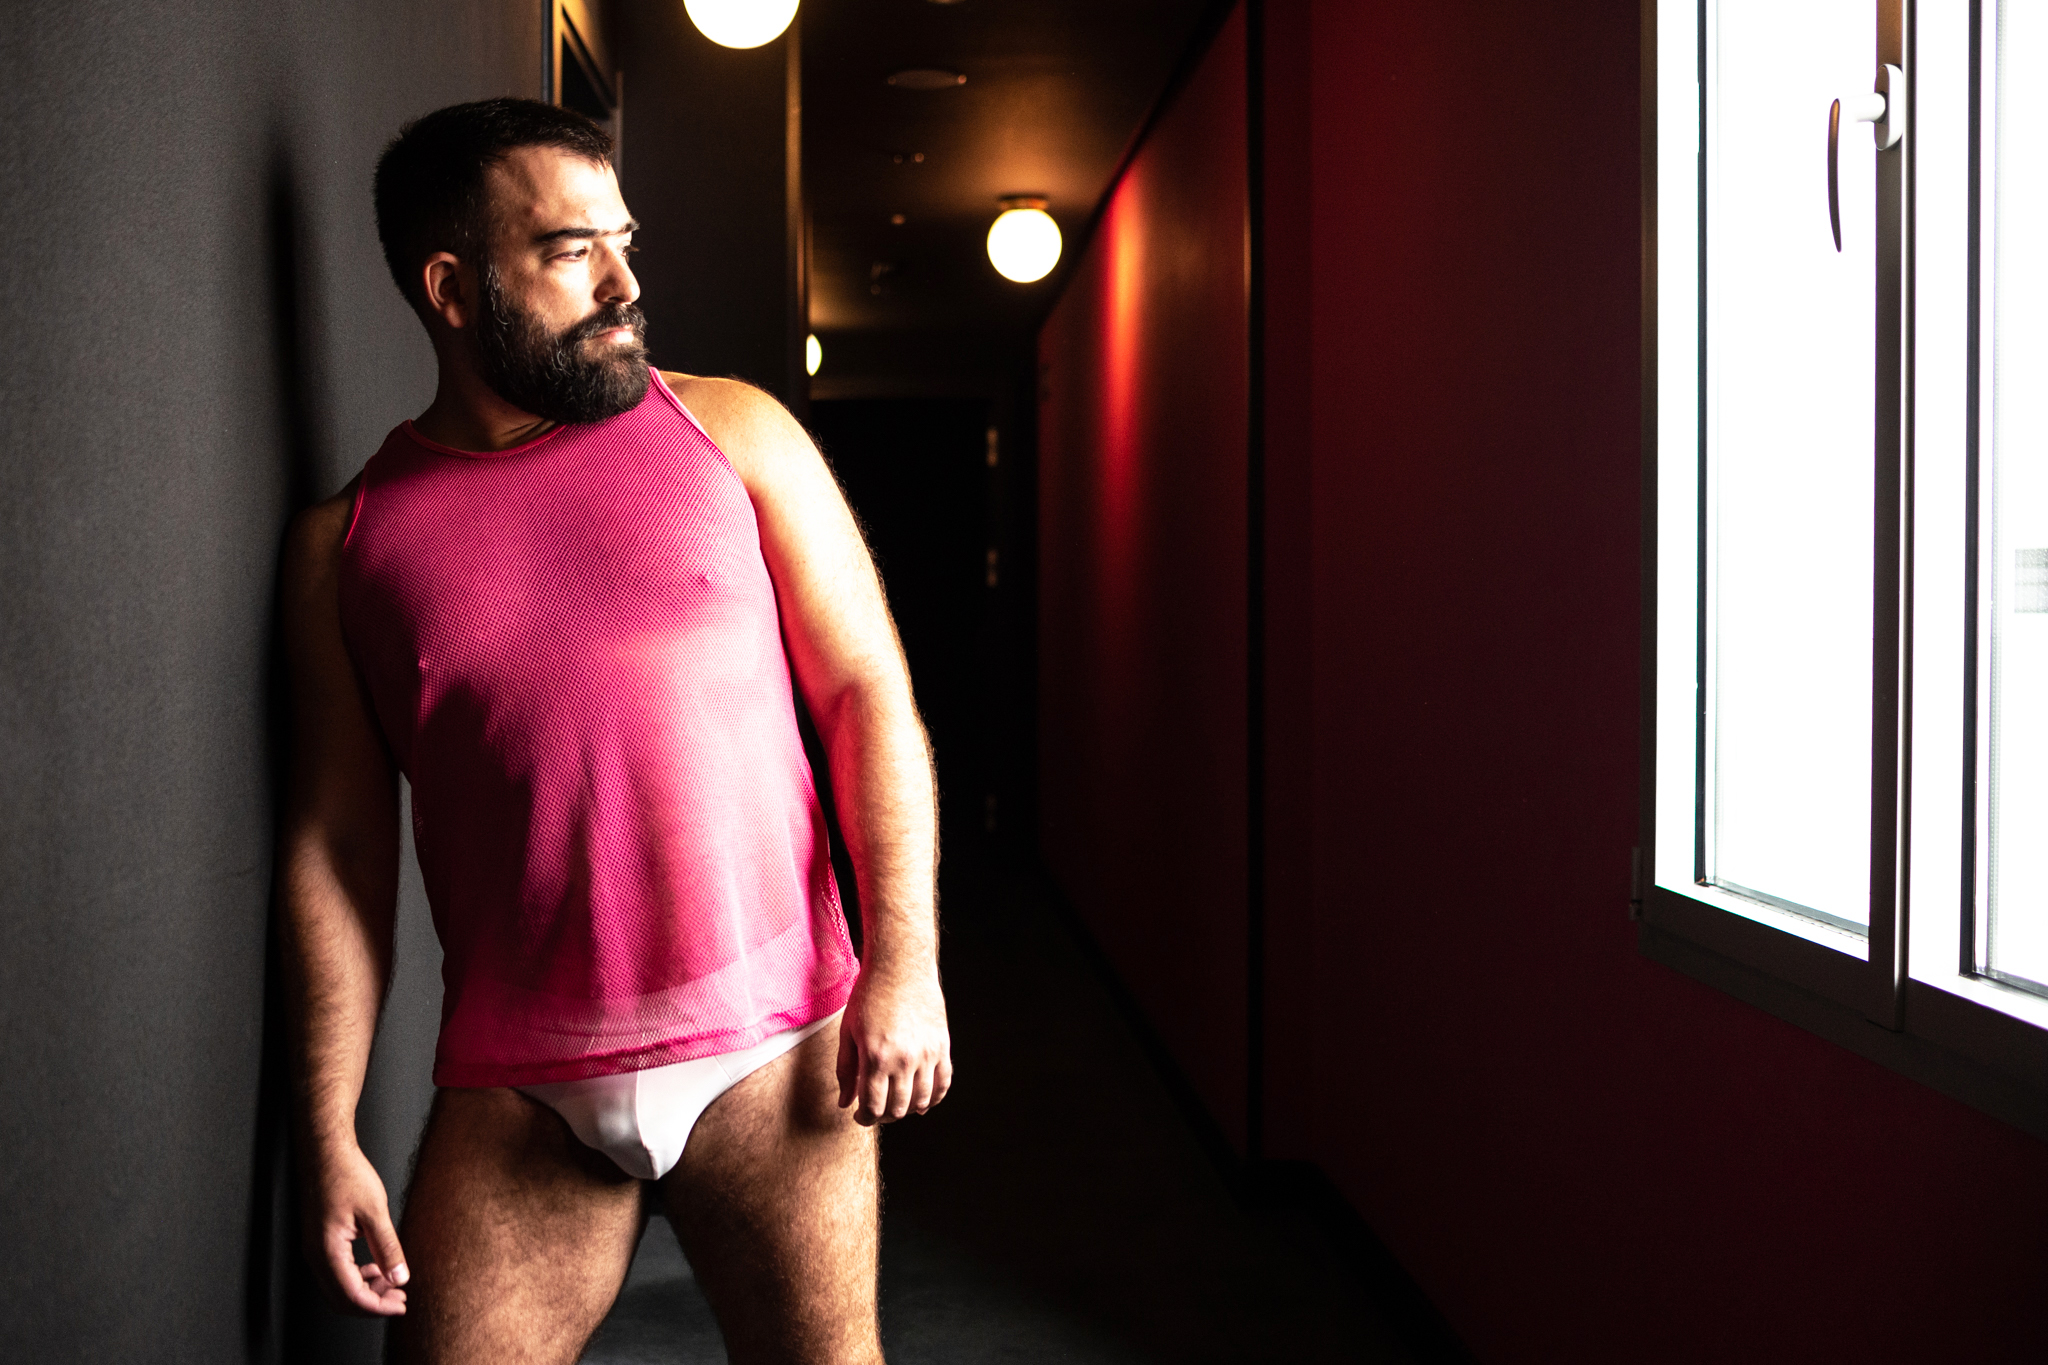 ELSKA spotlights bodies and voices of gay Madrid